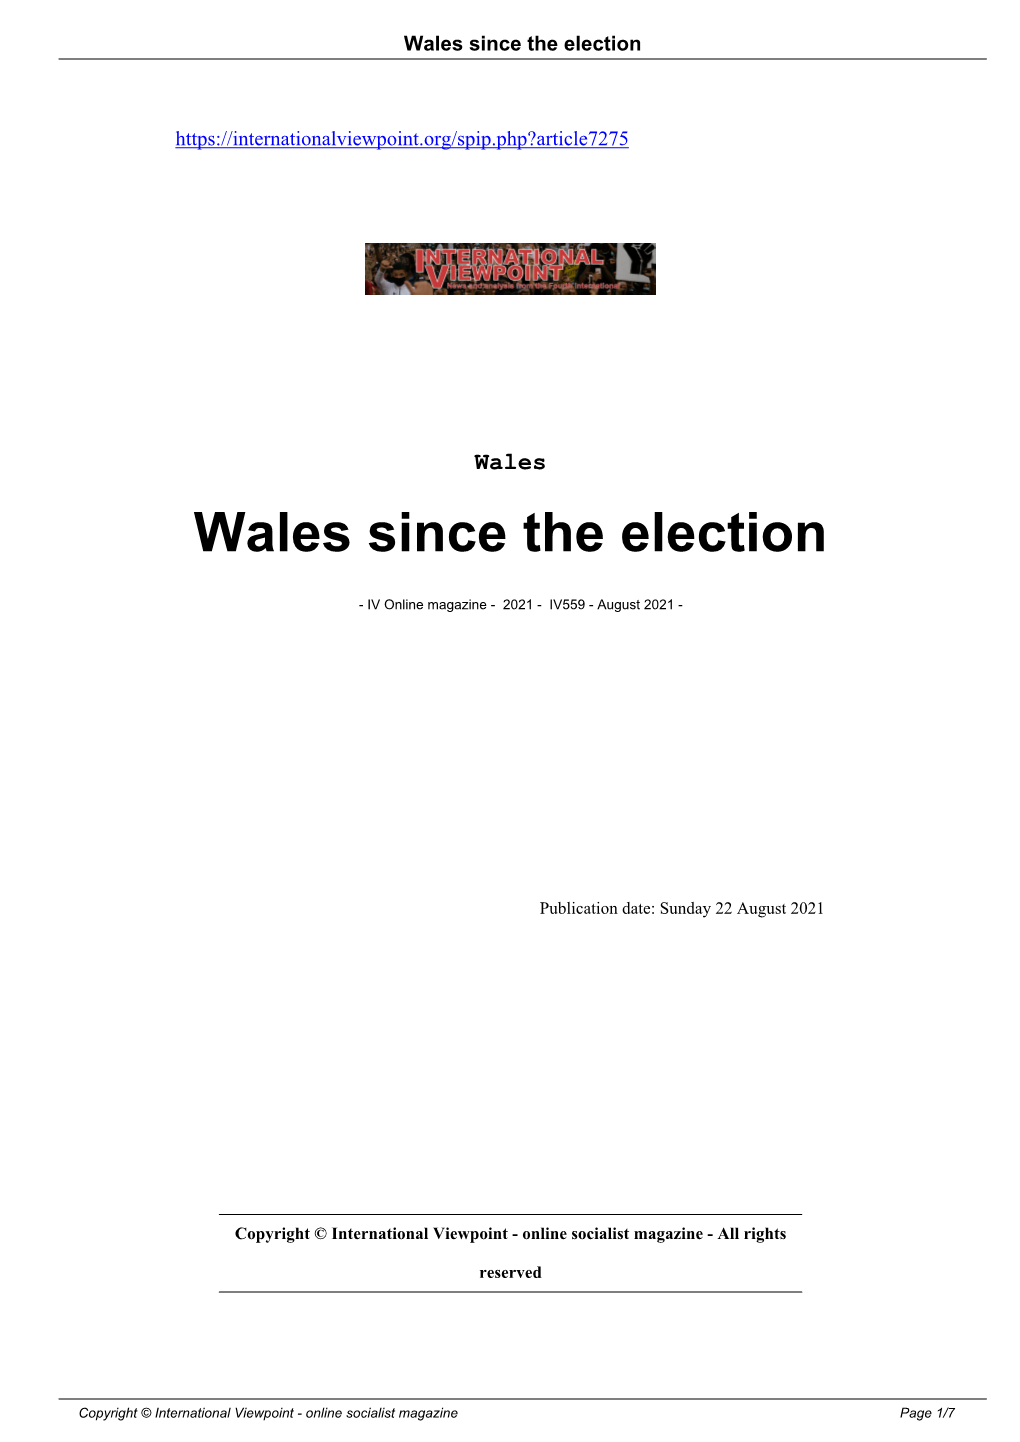 Wales Since the Election